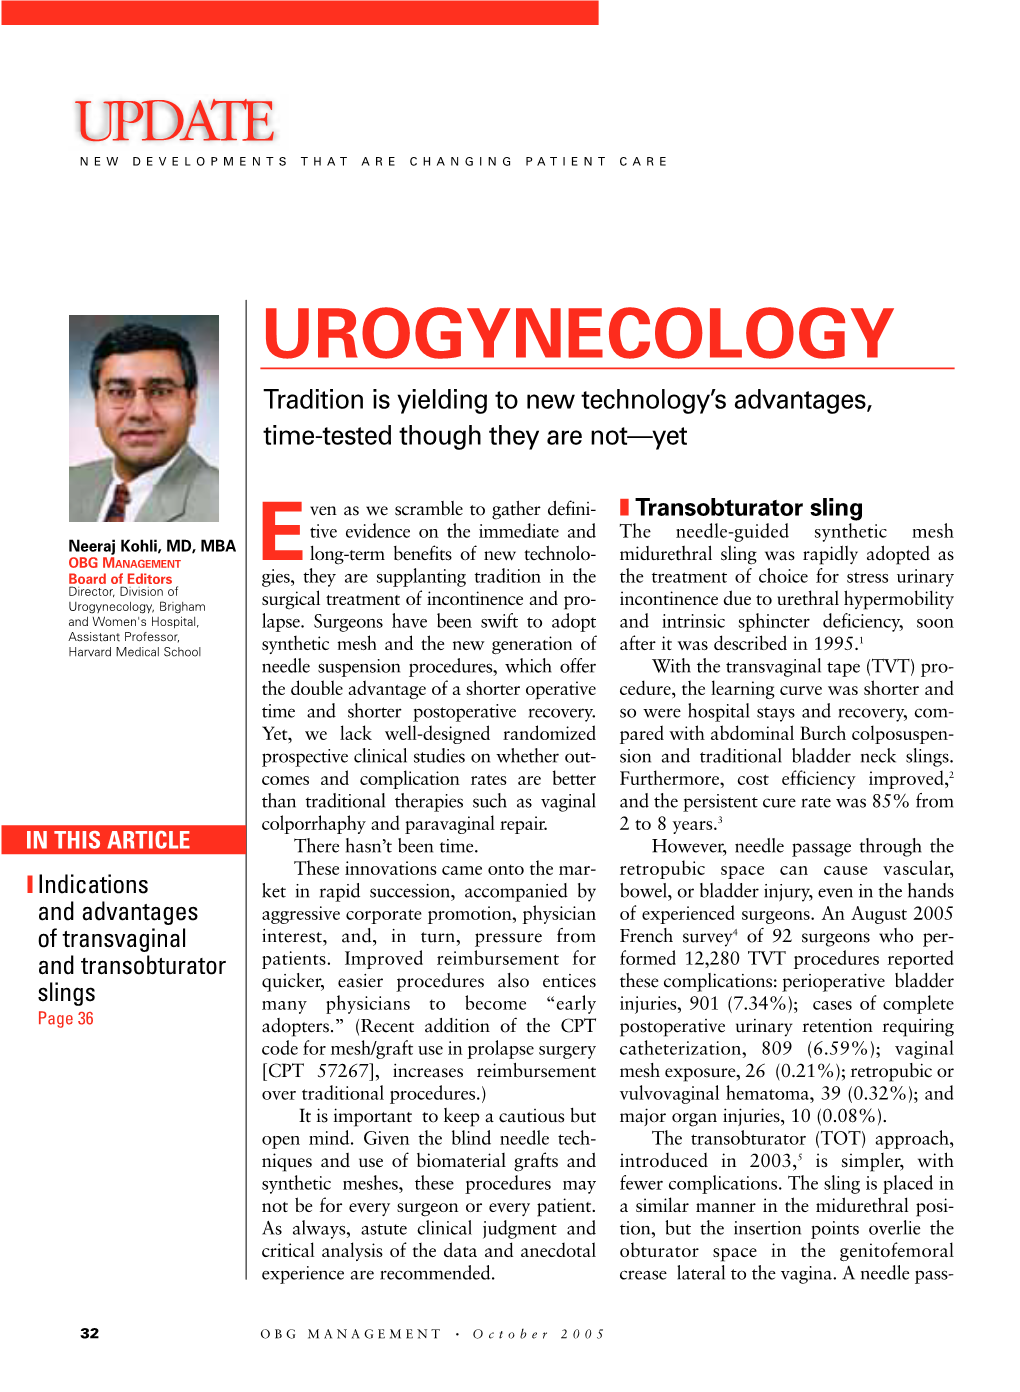 UROGYNECOLOGY Tradition Is Yielding to New Technology’S Advantages, Time-Tested Though They Are Not—Yet